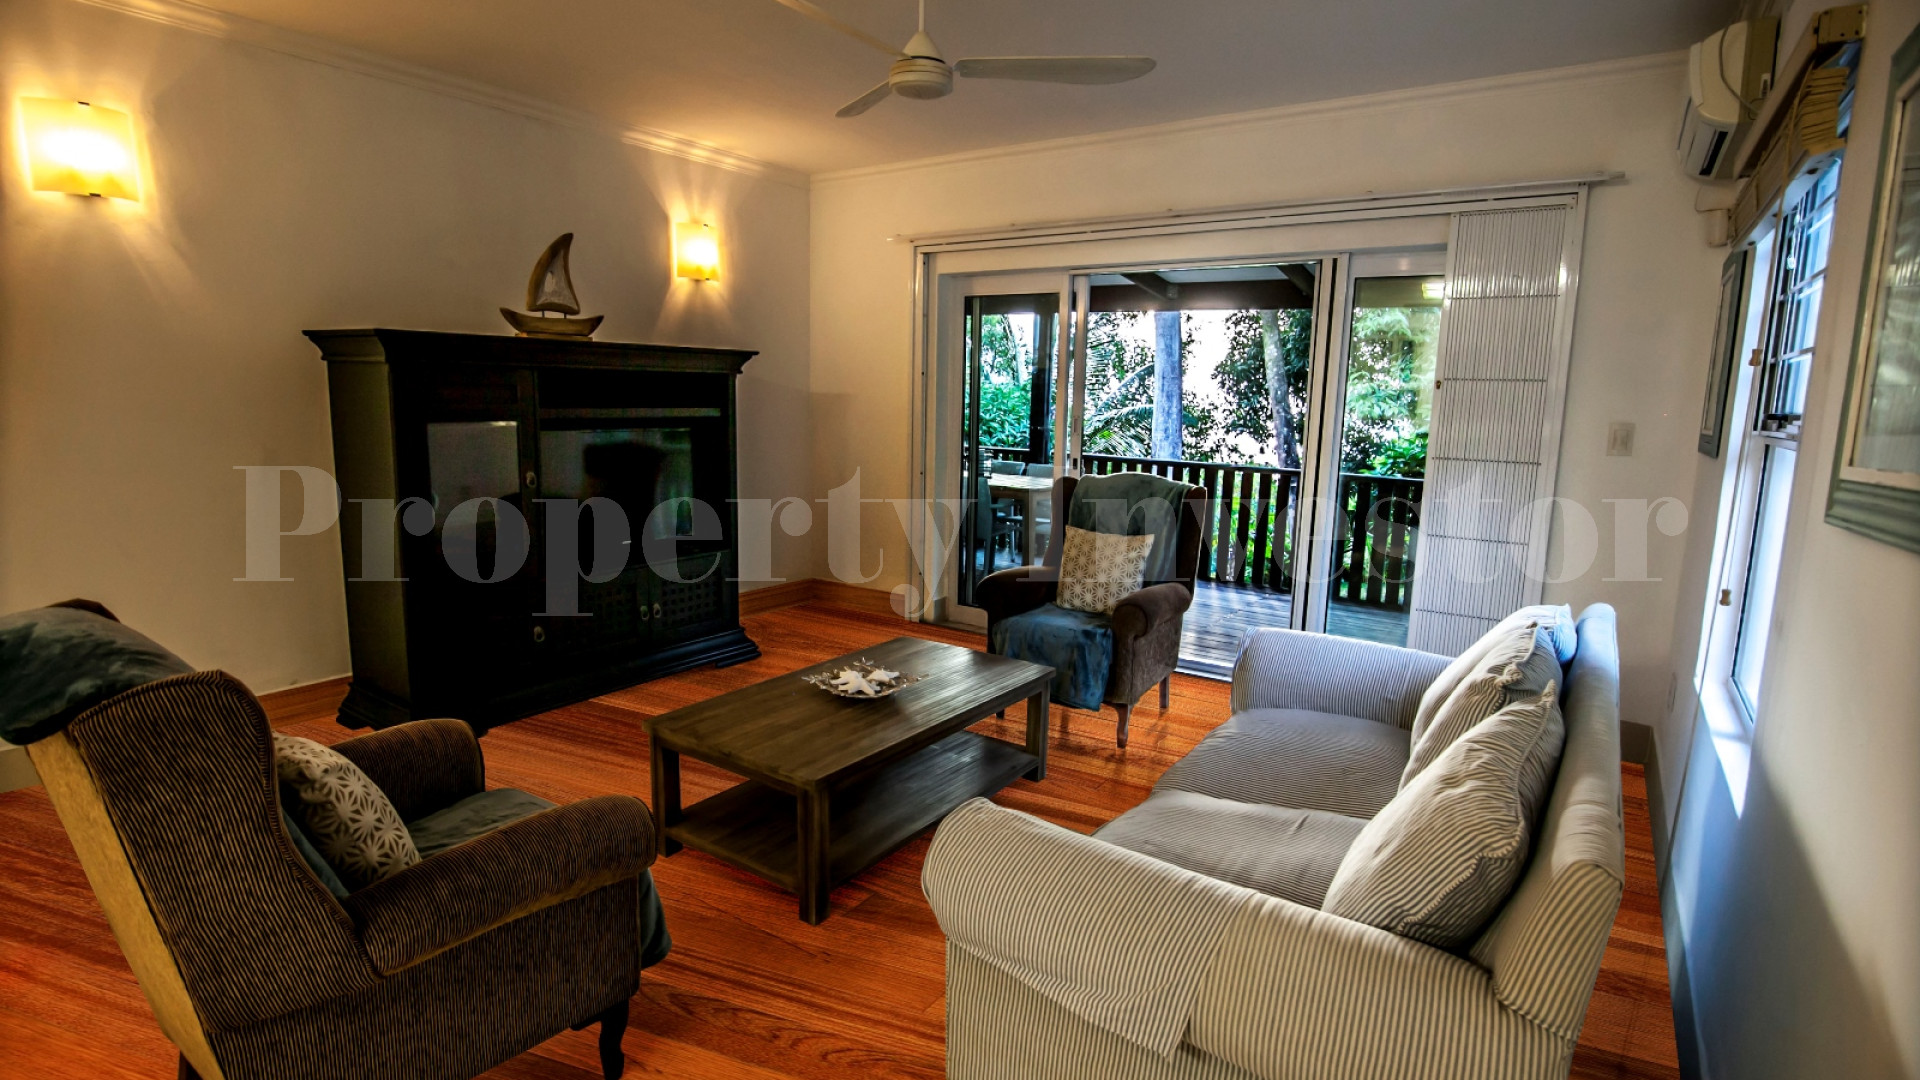 Lush 6 Bedroom Sea View Property Set on Landscaped Tropical Gardens in Mahé, Seychelles